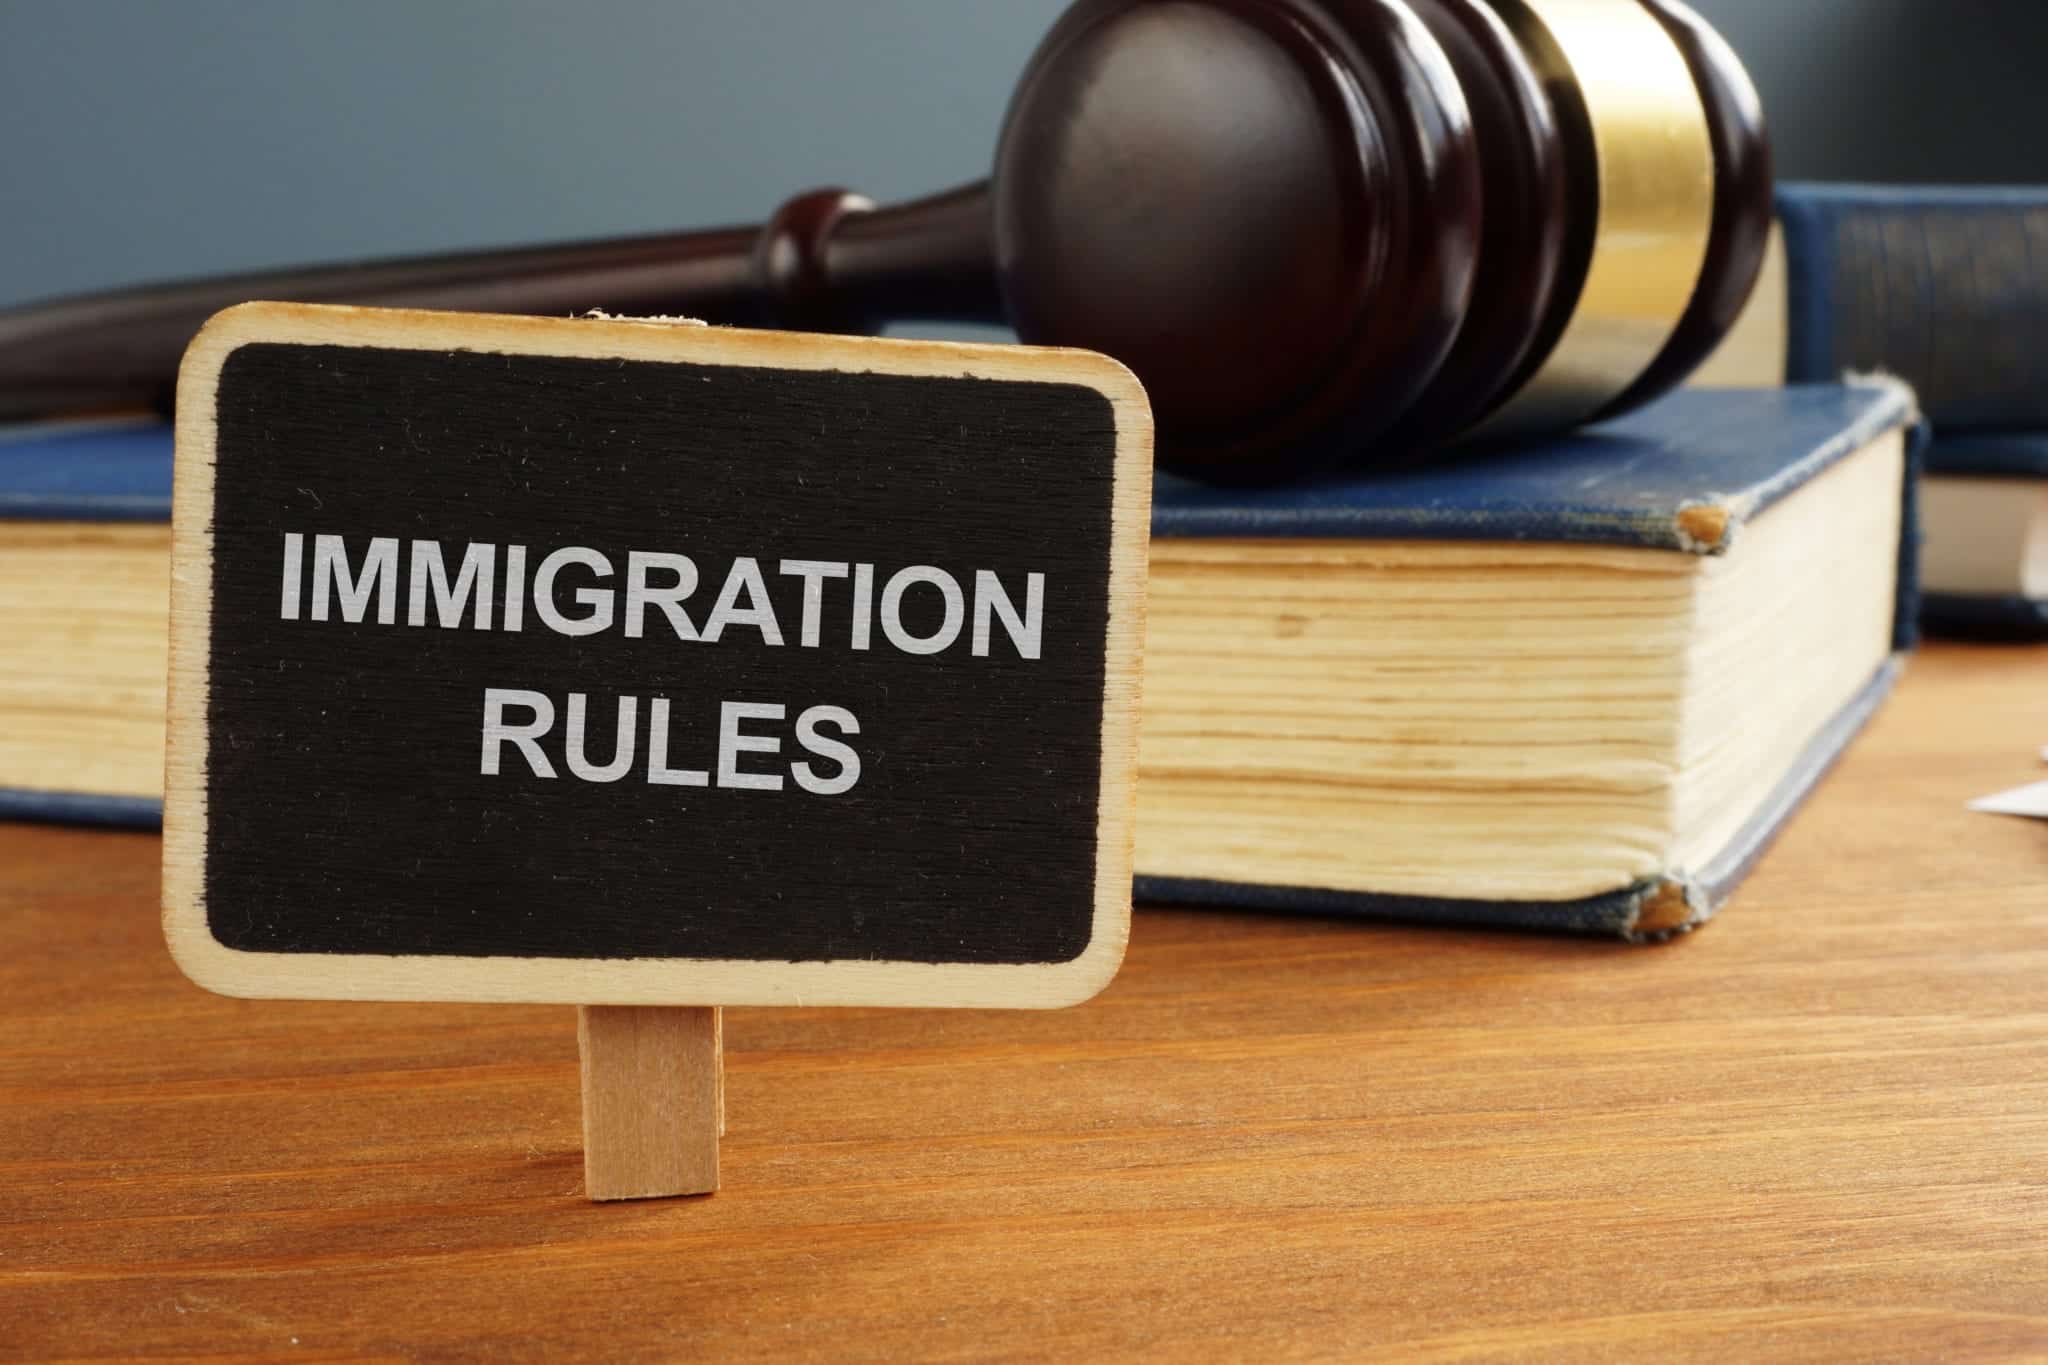 Ensure Your Immigration Rights as Courts Close for Coronavirus